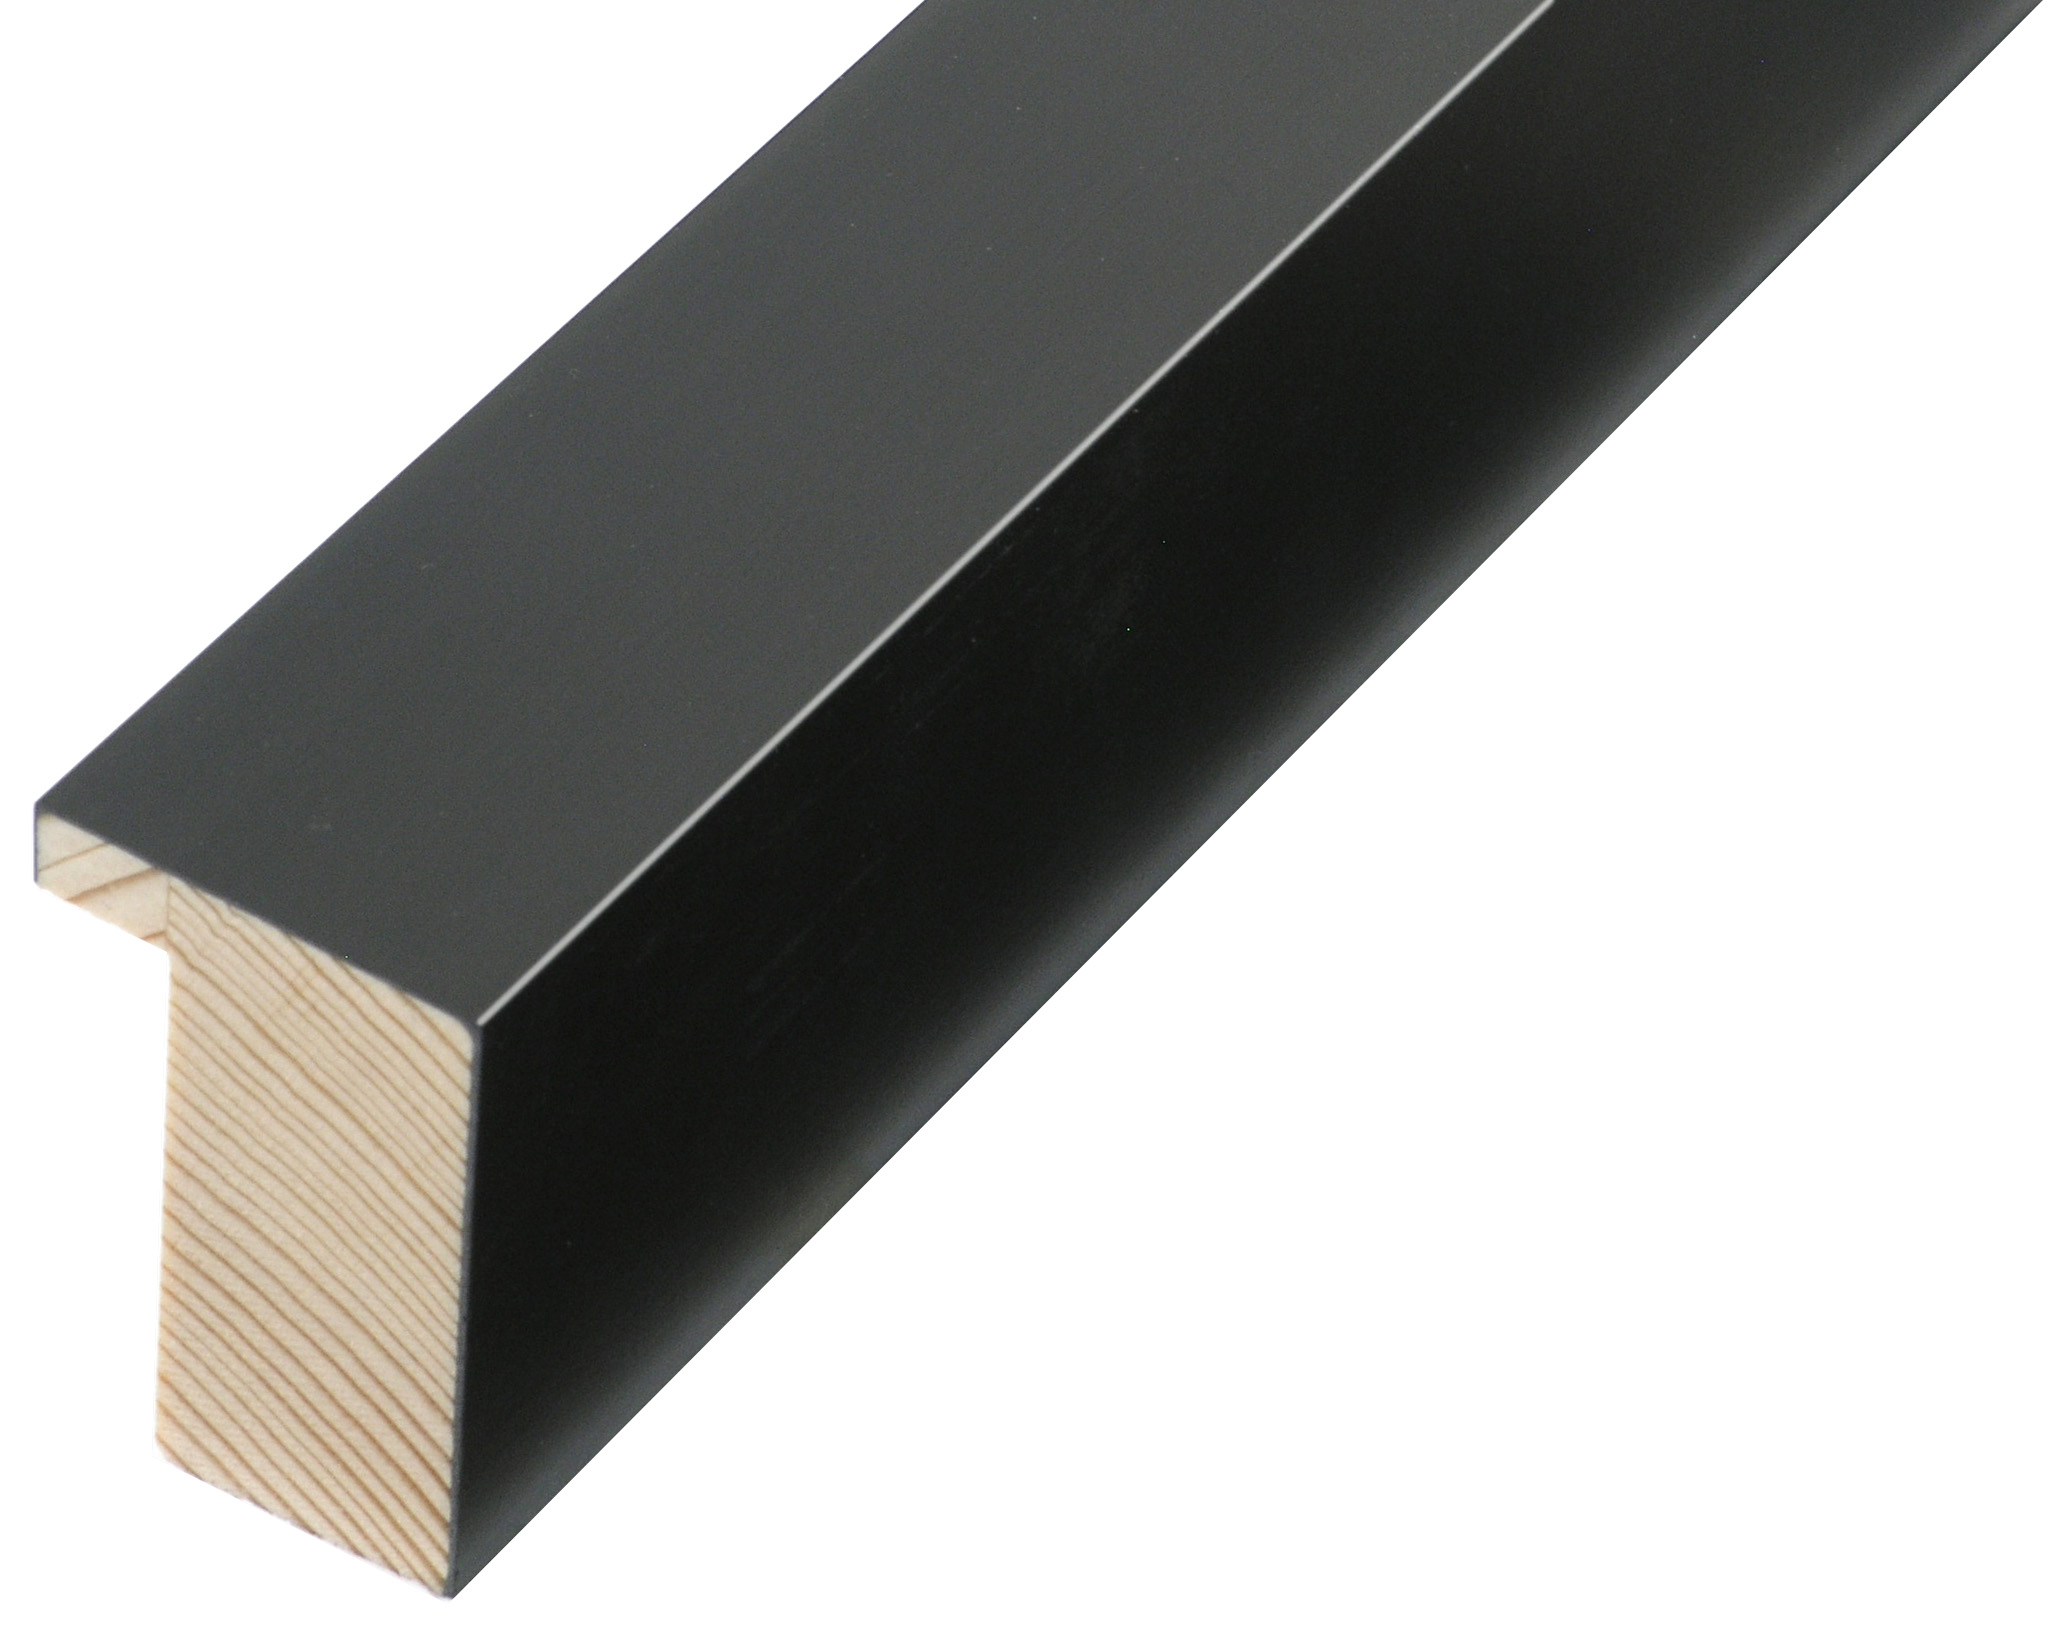 Moulding finger-jointed pine width 33mm height 50 - black - 827NERO